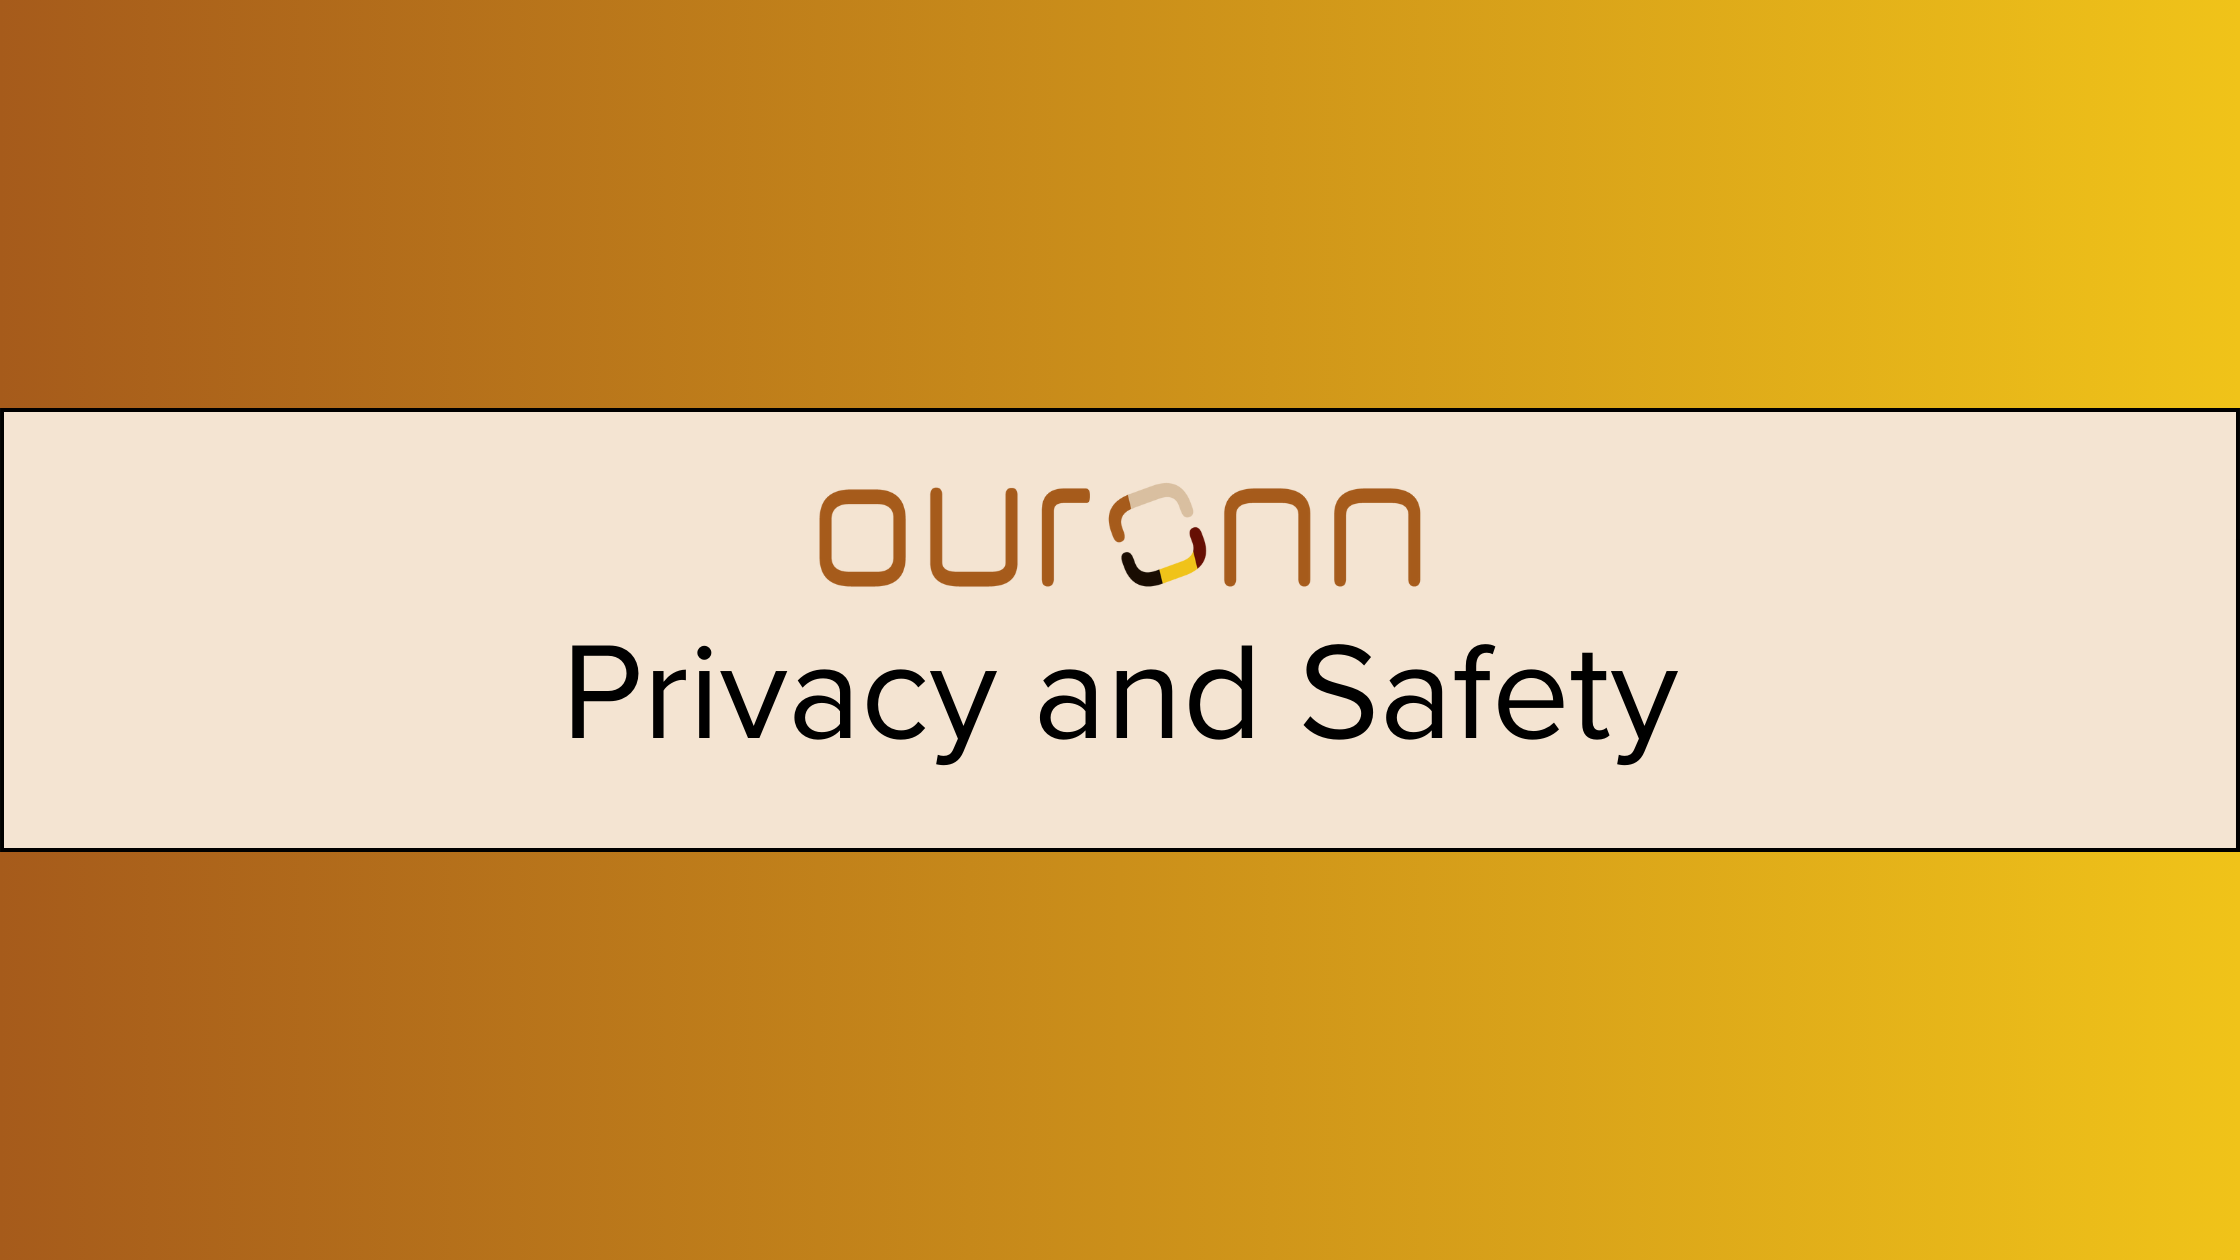 "Privacy and Safety" Cover Image